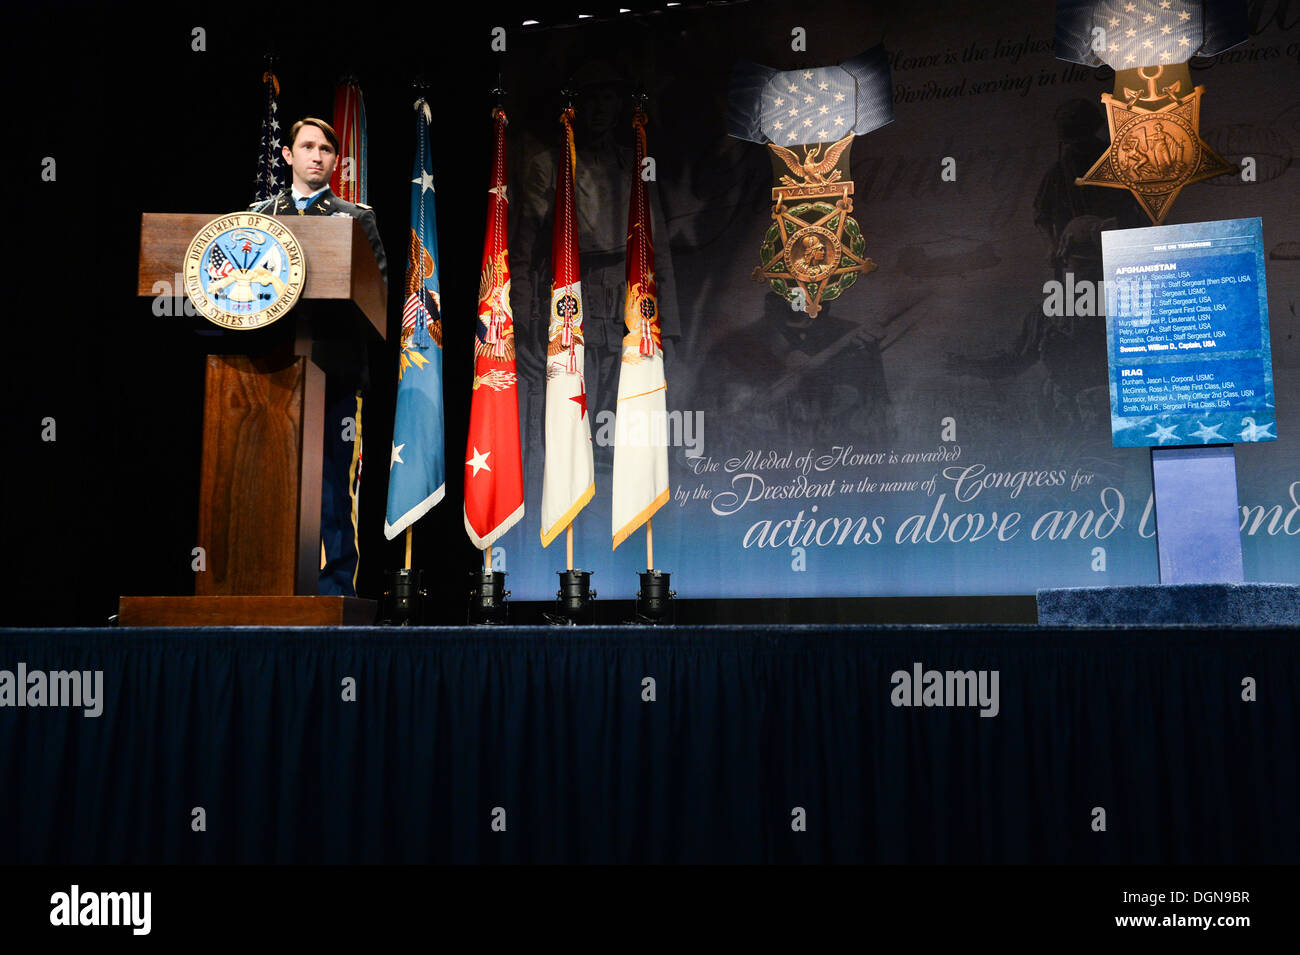 Former U.S. Army Capt. William D. Swenson, a Medal of Honor recipient, gives his speech at his Medal of Honor Induction at the Pentagon Auditorium in Washington, D.C., Oct 16, 2013 Stock Photo